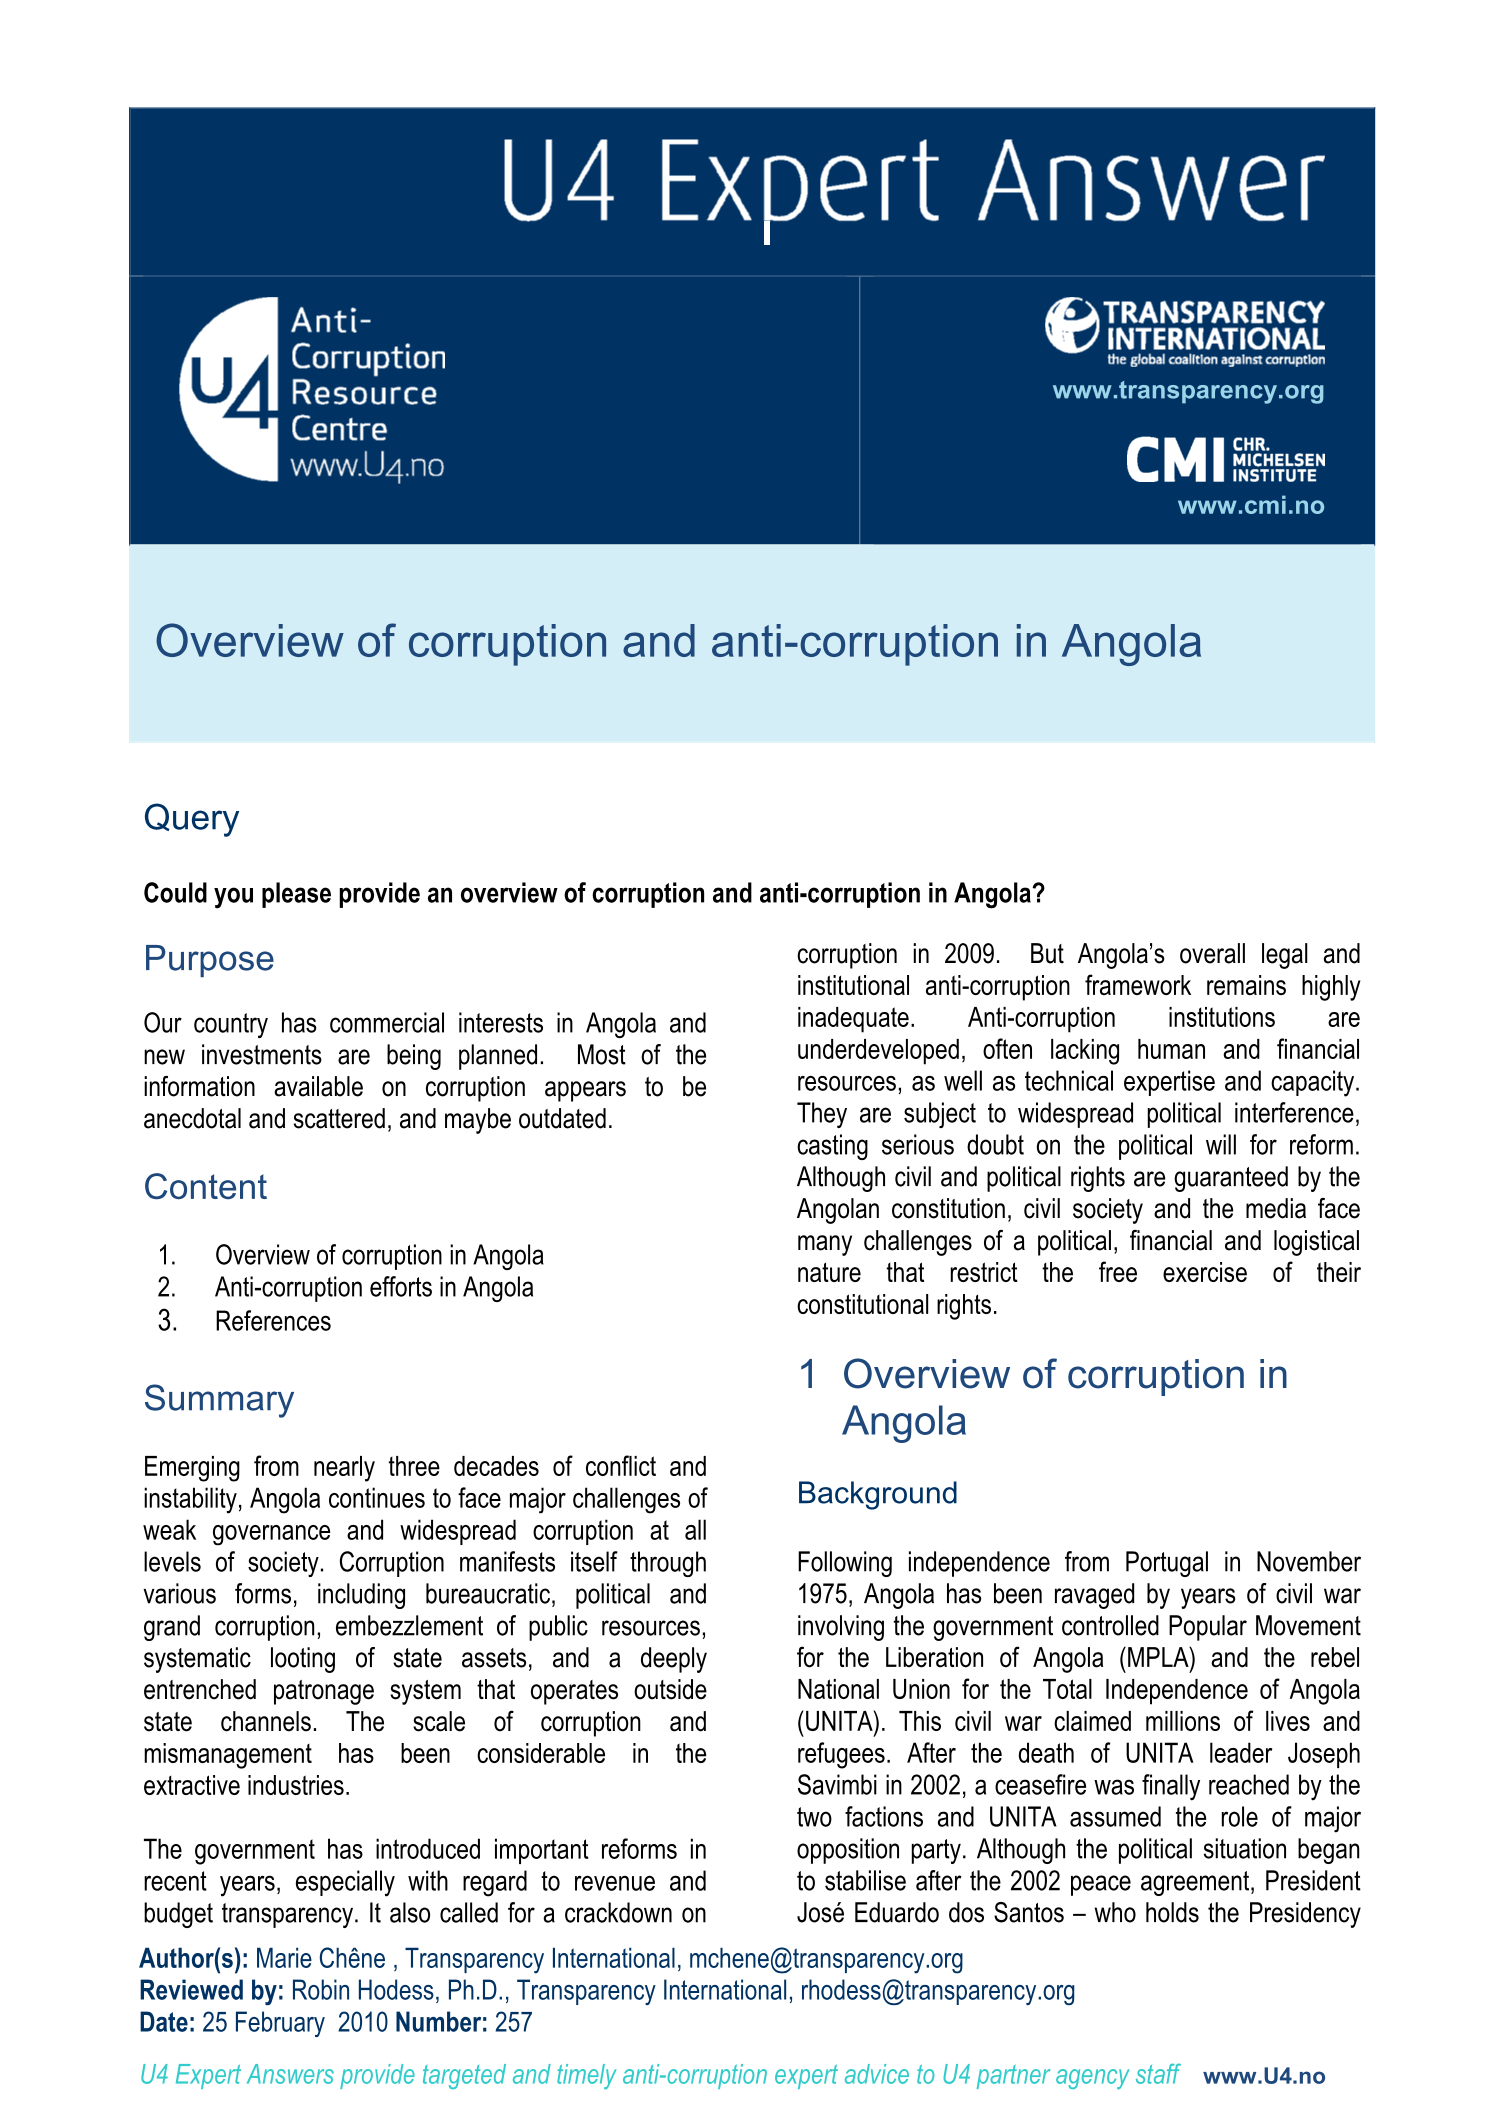 Overview of corruption and anti-corruption in Angola